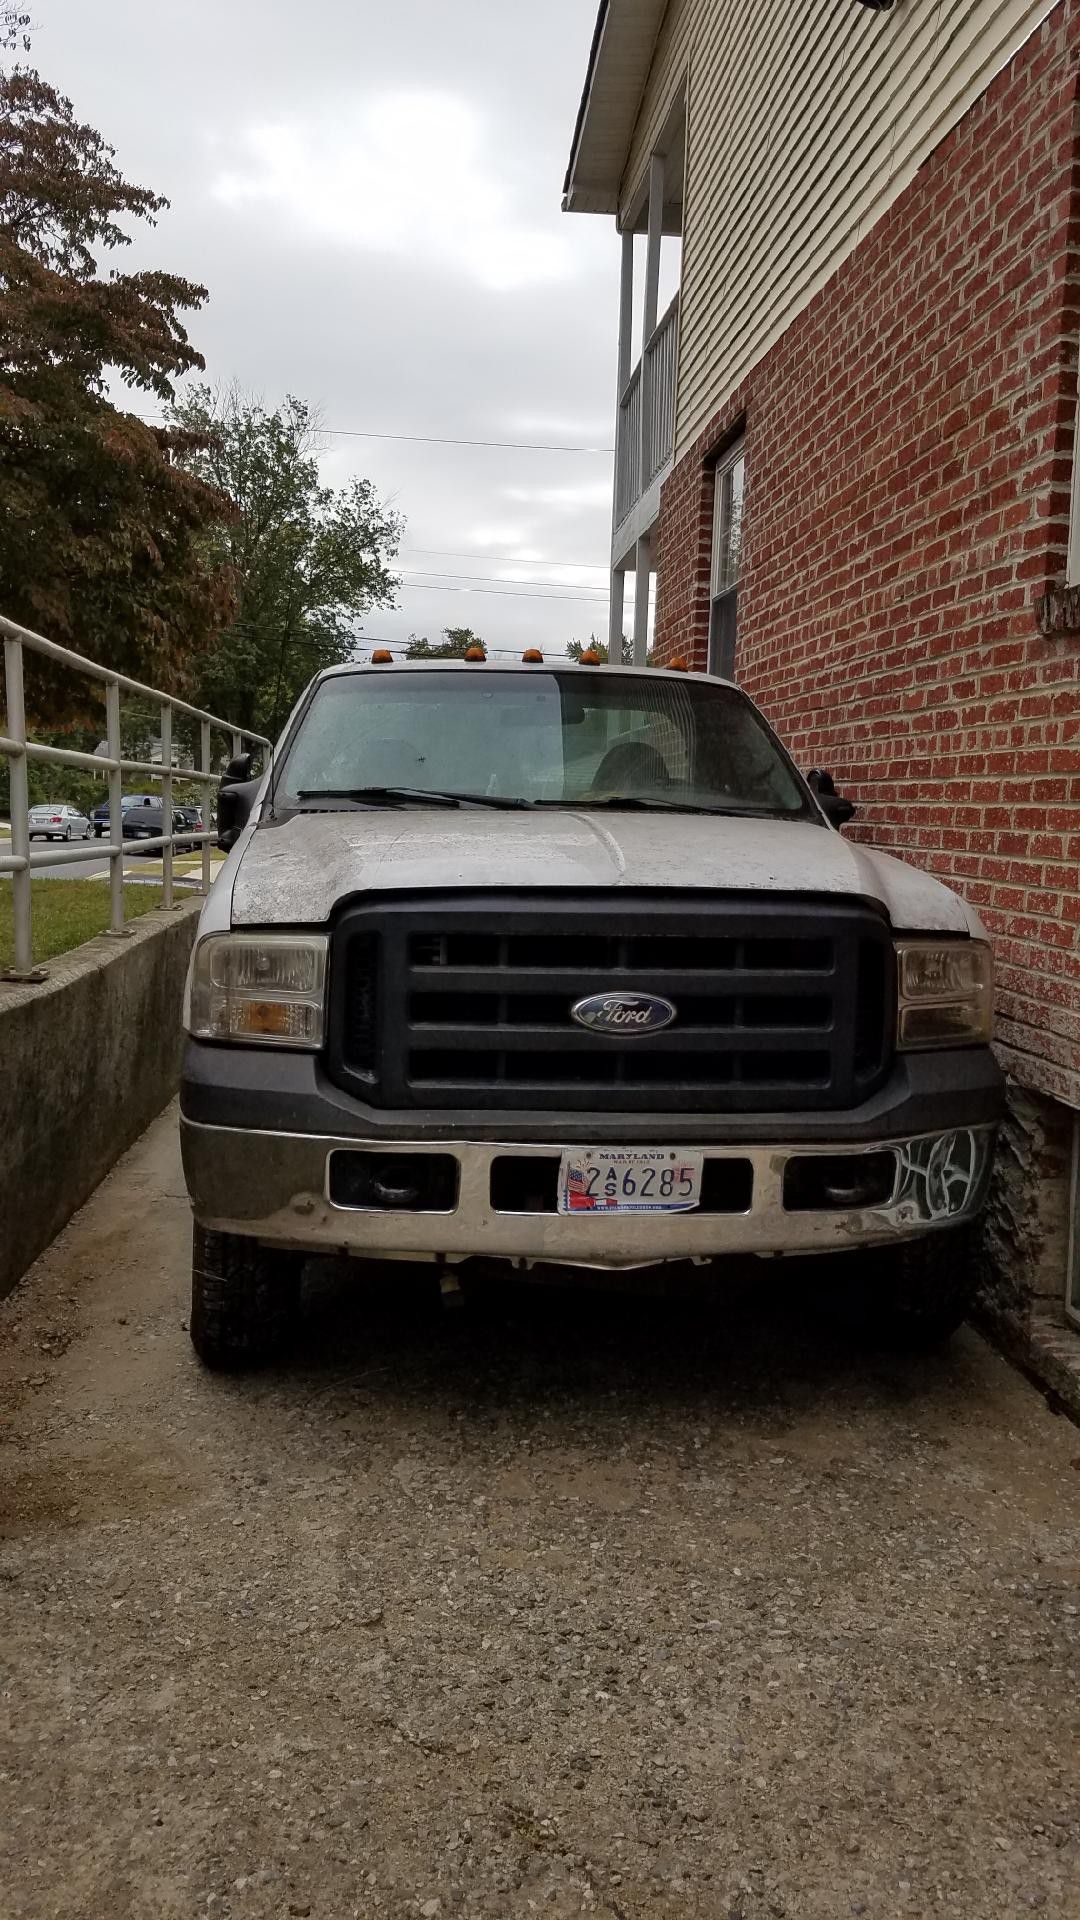 2006 SUPER DUTY 4X4 NEW ALL TIRES THE CAR RUNNING BUT DON'T DRIVERS BECAUSE INEED LIFTERS FIXE